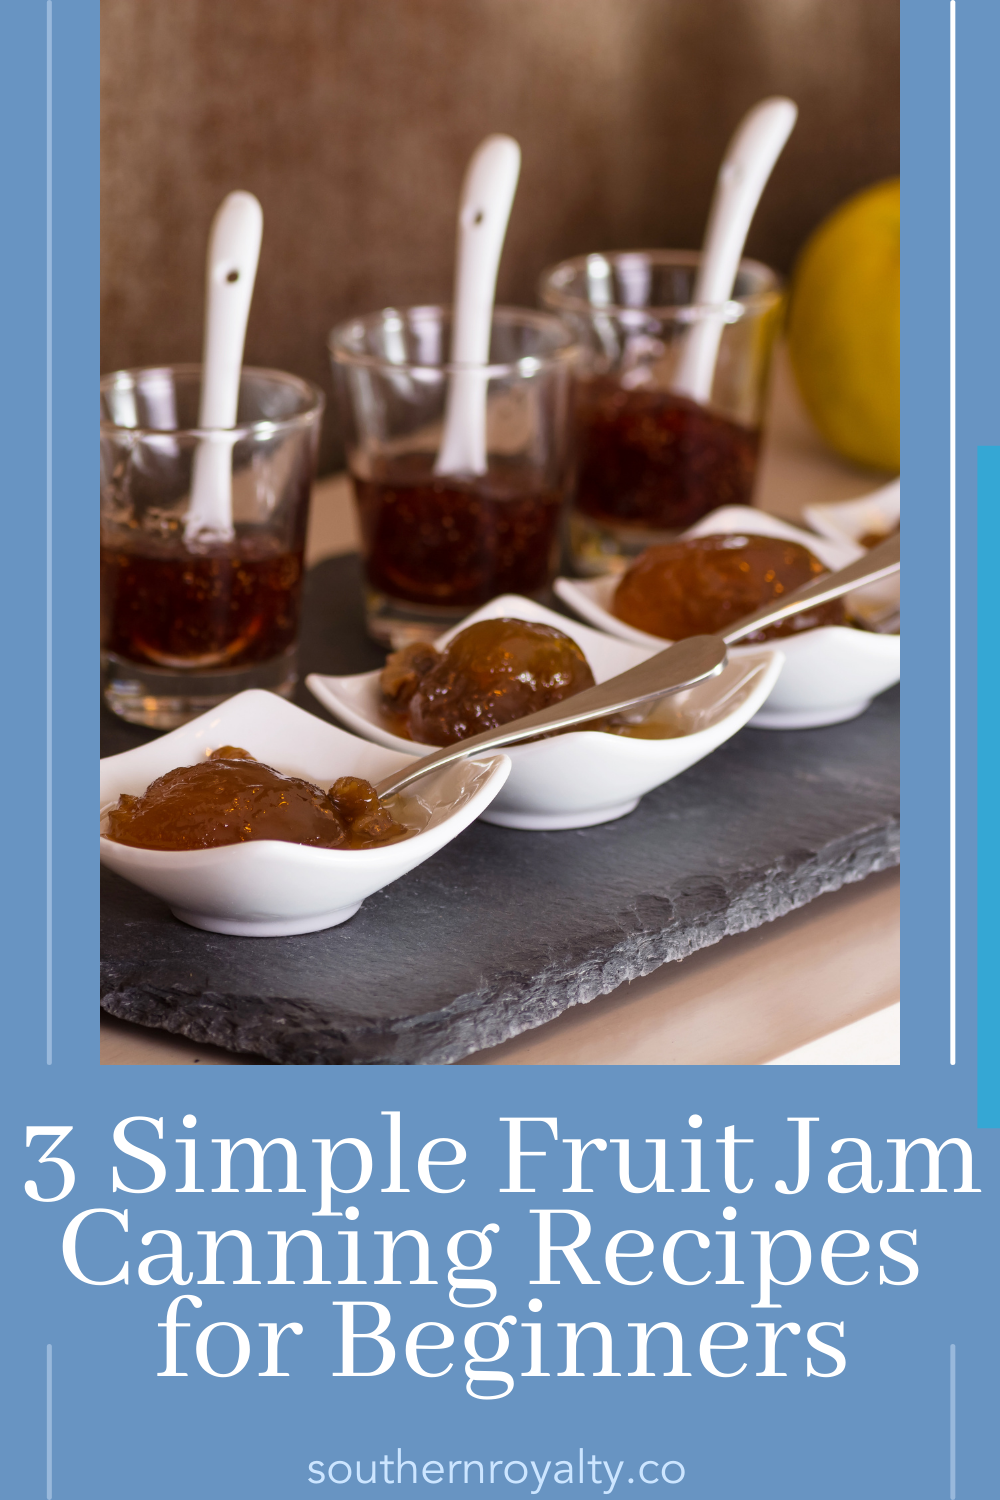 Three simple fruit canning recipes for beginners, strawberry jam recipe, apricot and almond jam recipe, blackberry recipe